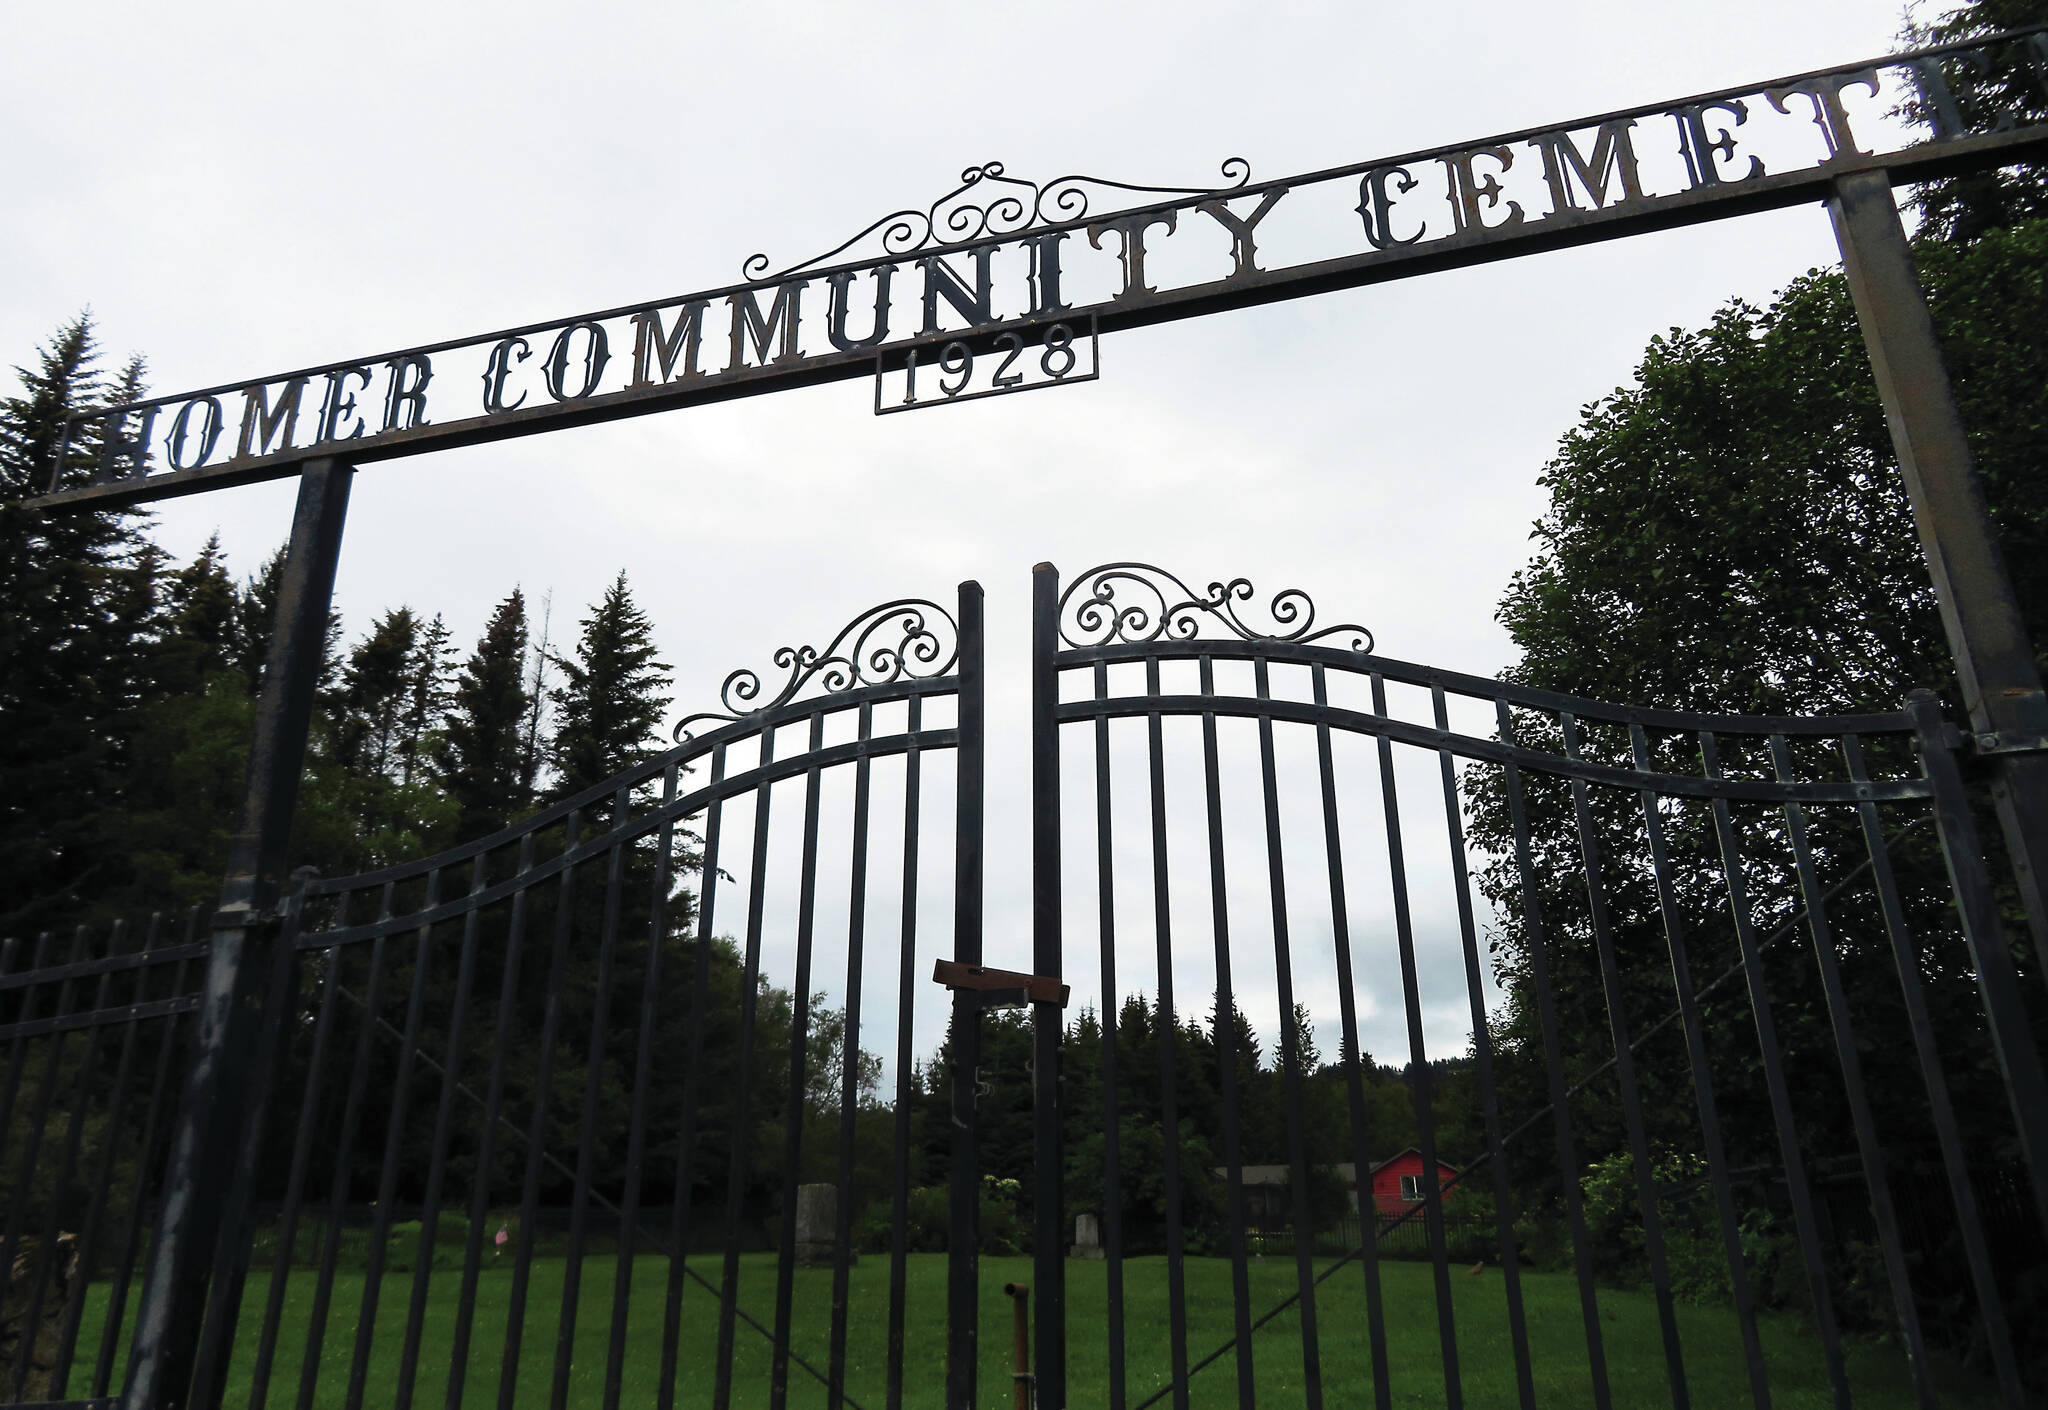 Homer Community Cemetery was first established in 1928 and has been closed to non-reserved burials since the early 1980s. (Clark Fair photo)